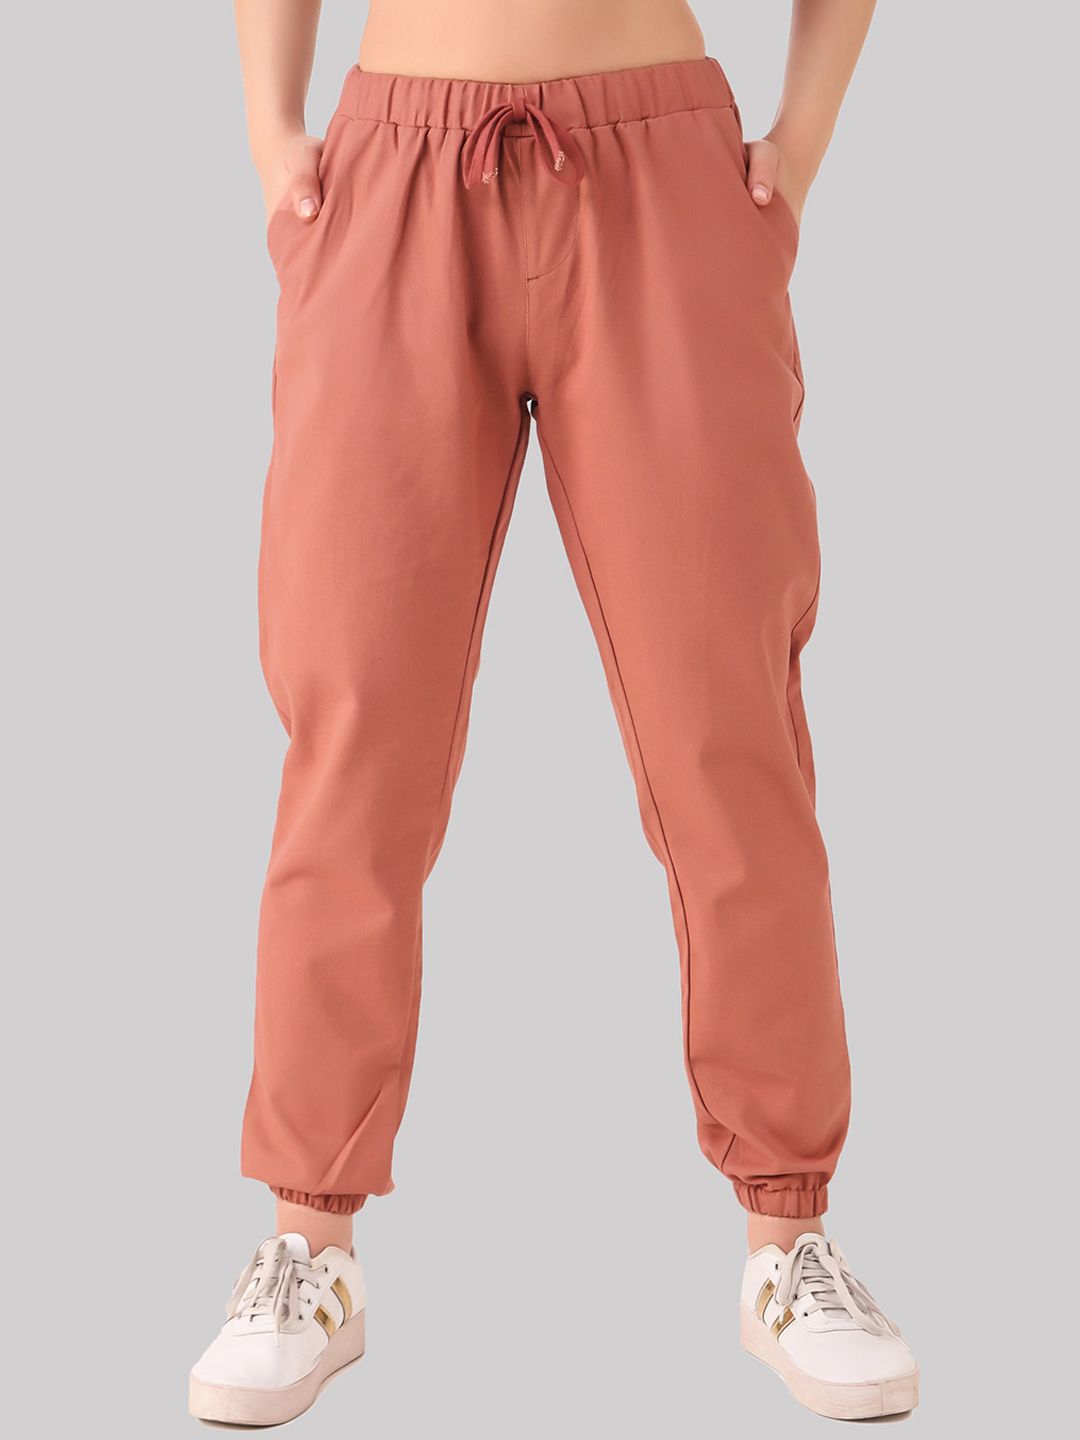 Q-rious Women Red Cotton Twill Regular Fit Joggers Trousers Price in India